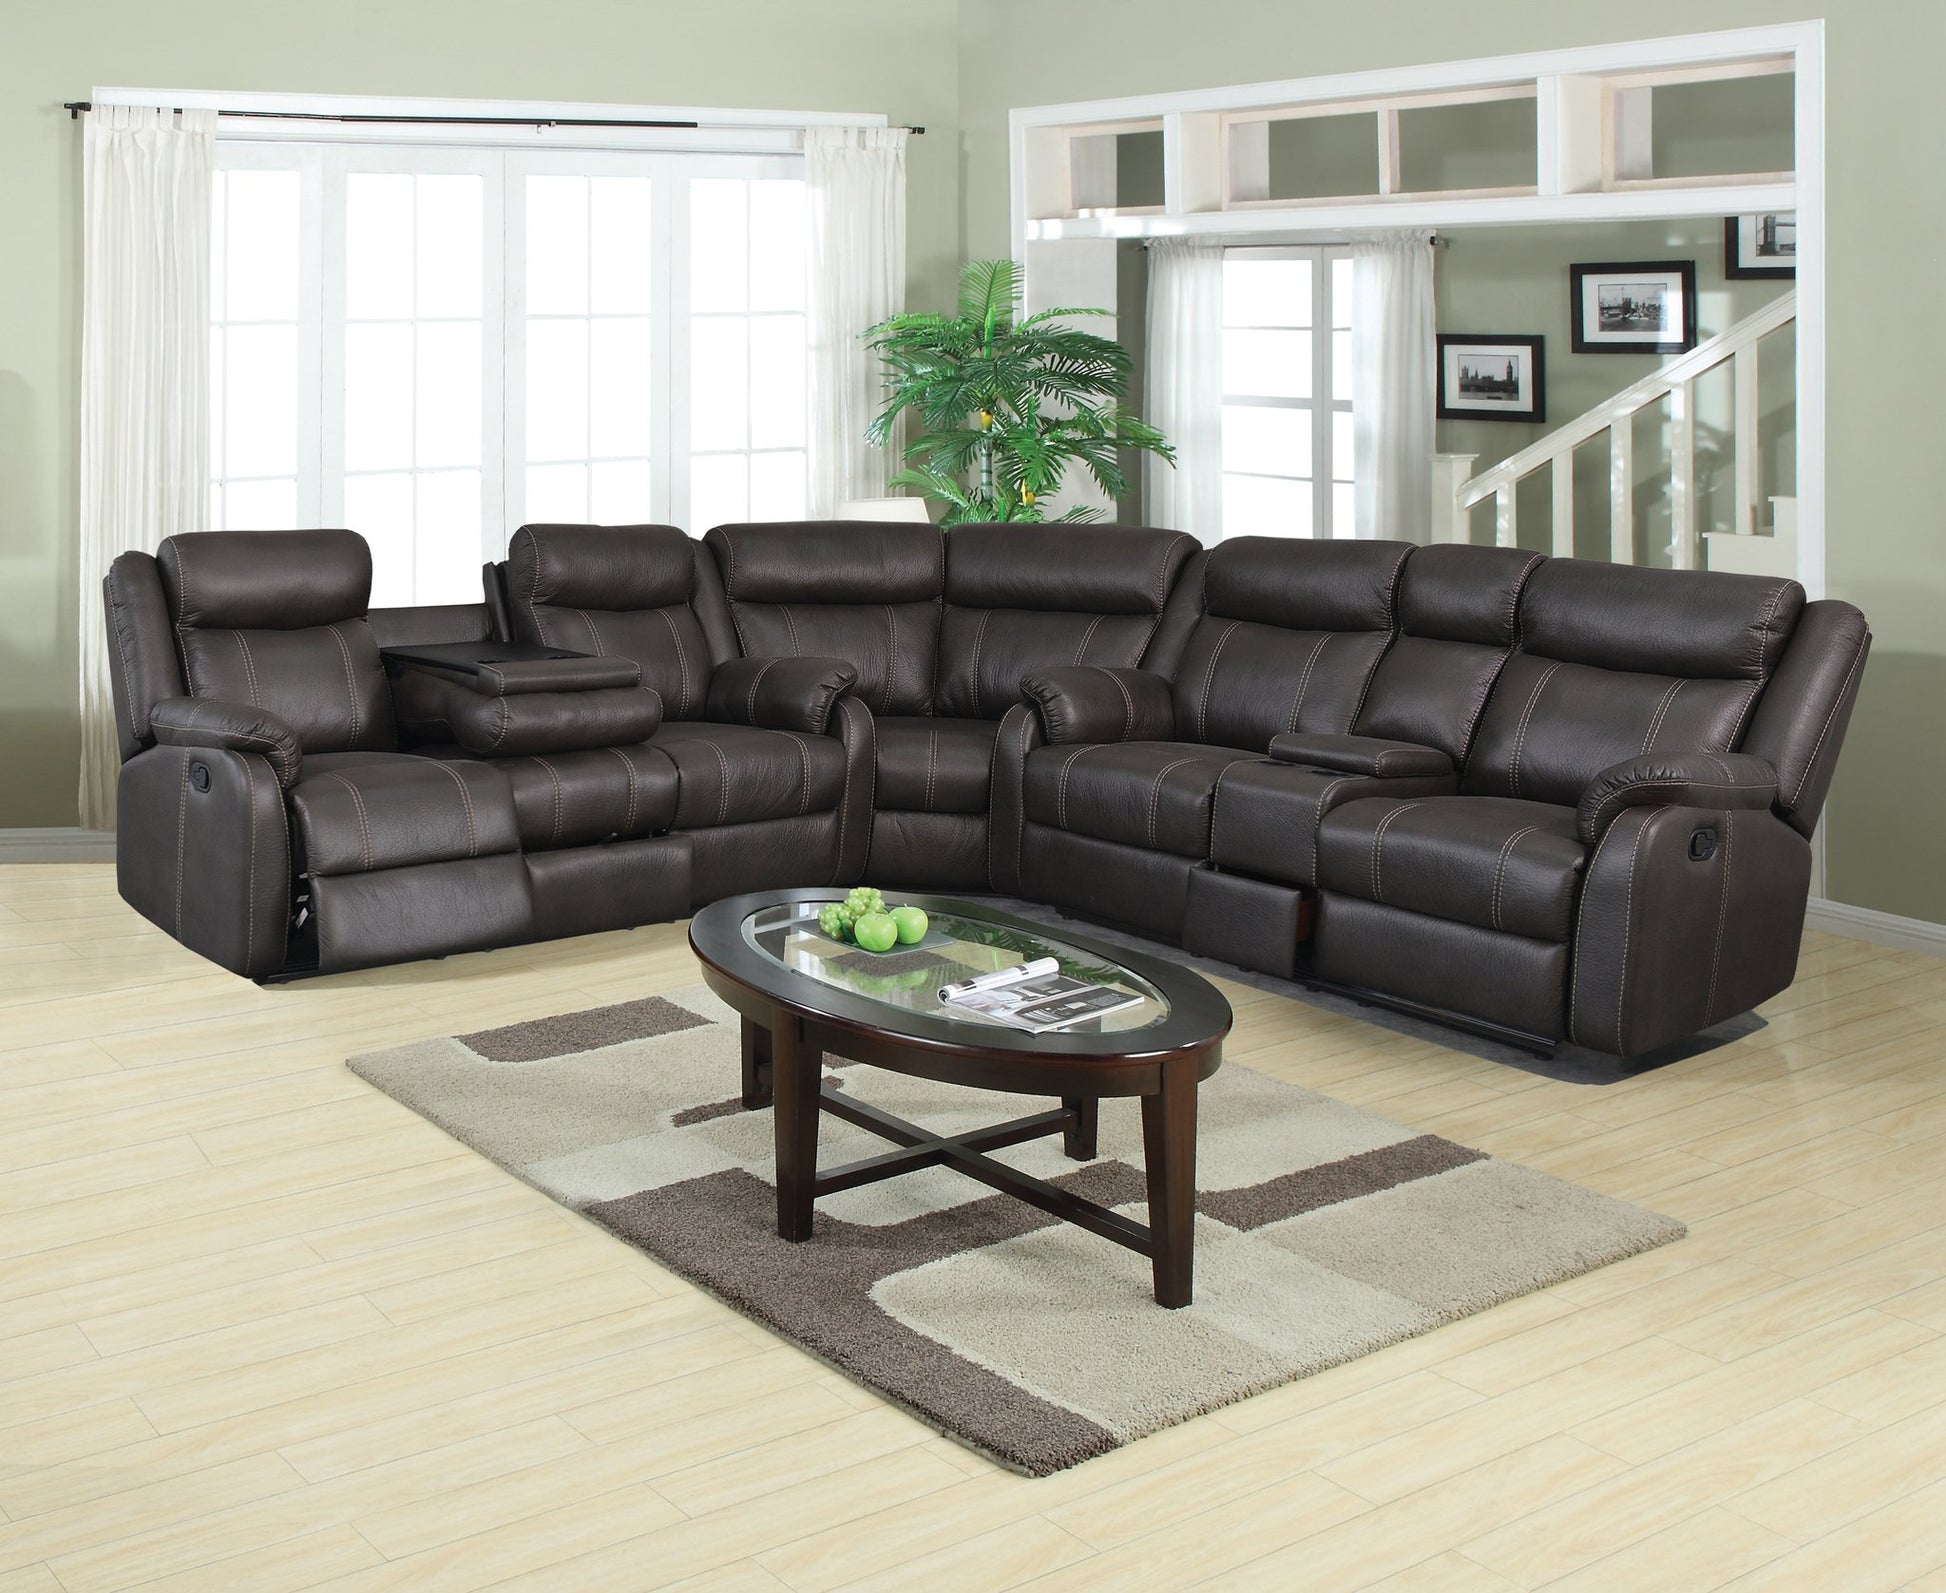 WEEKLY or MONTHLY. Fully Modular Charcoal Couch Set – Community Furnishings